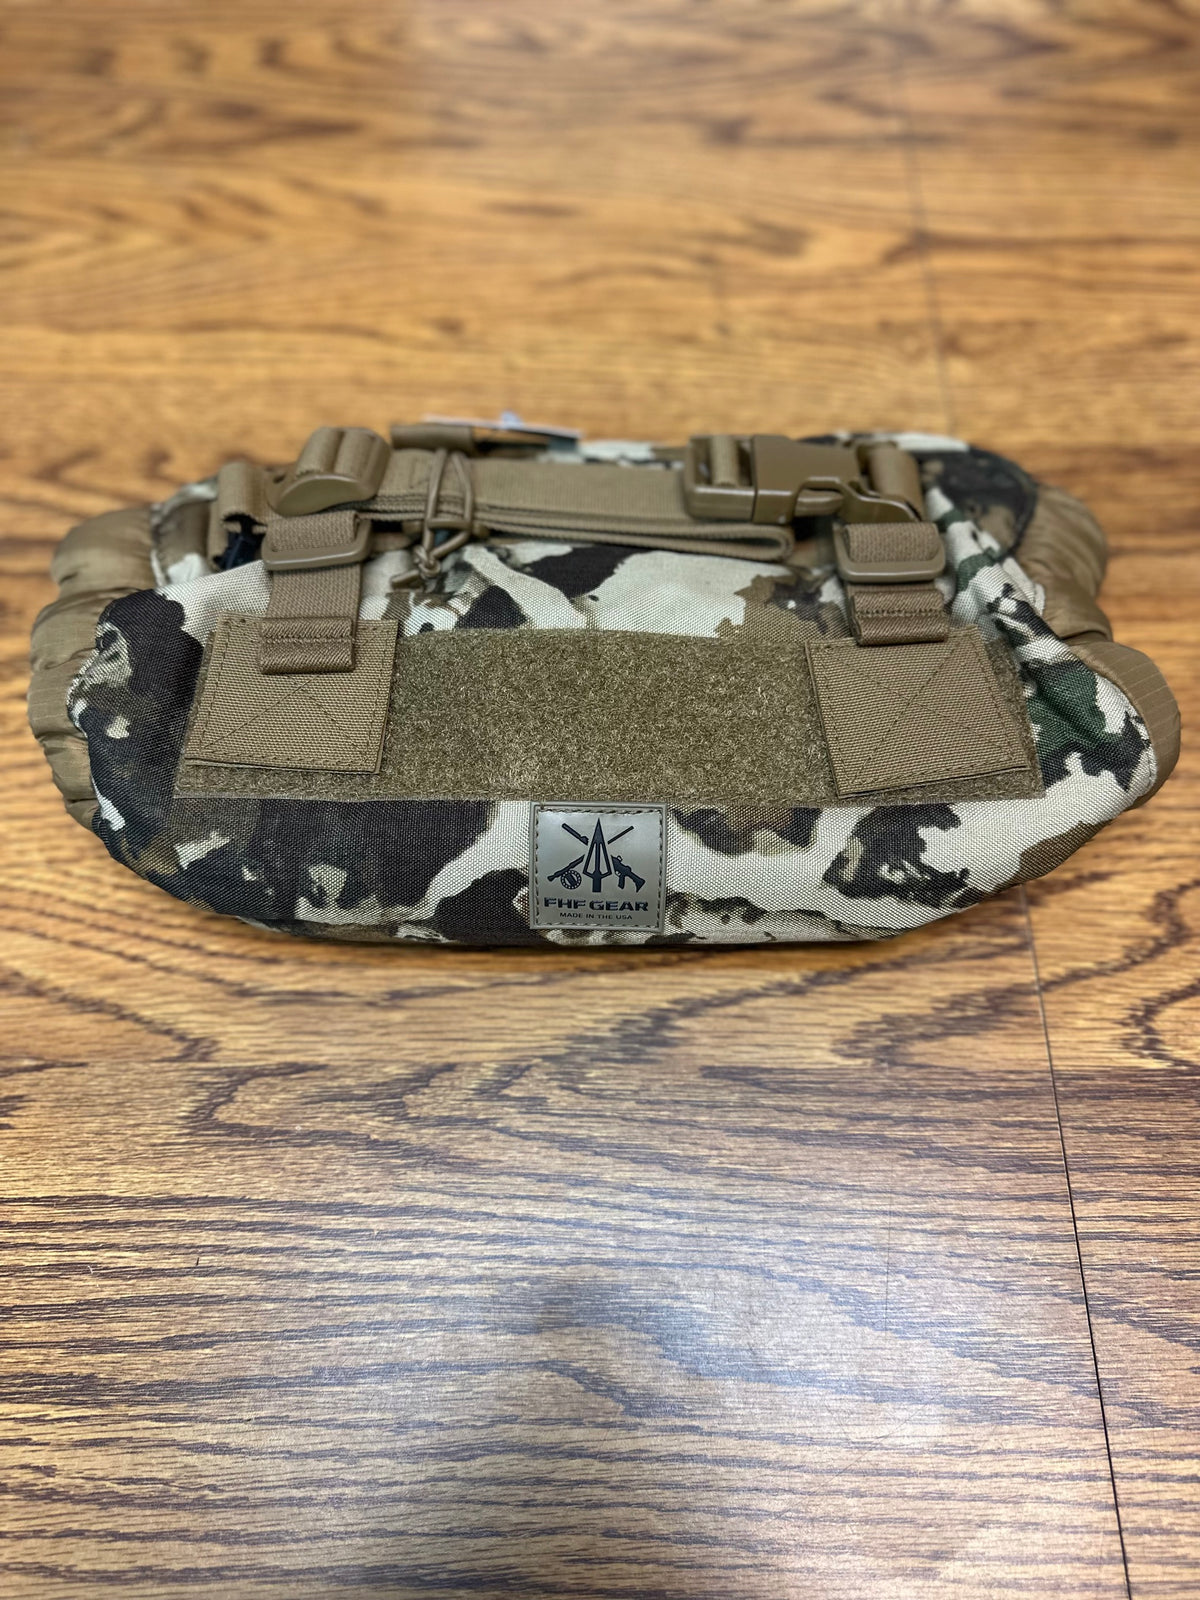 FHF MOLLE-Muff - First Lite Fusion pattern